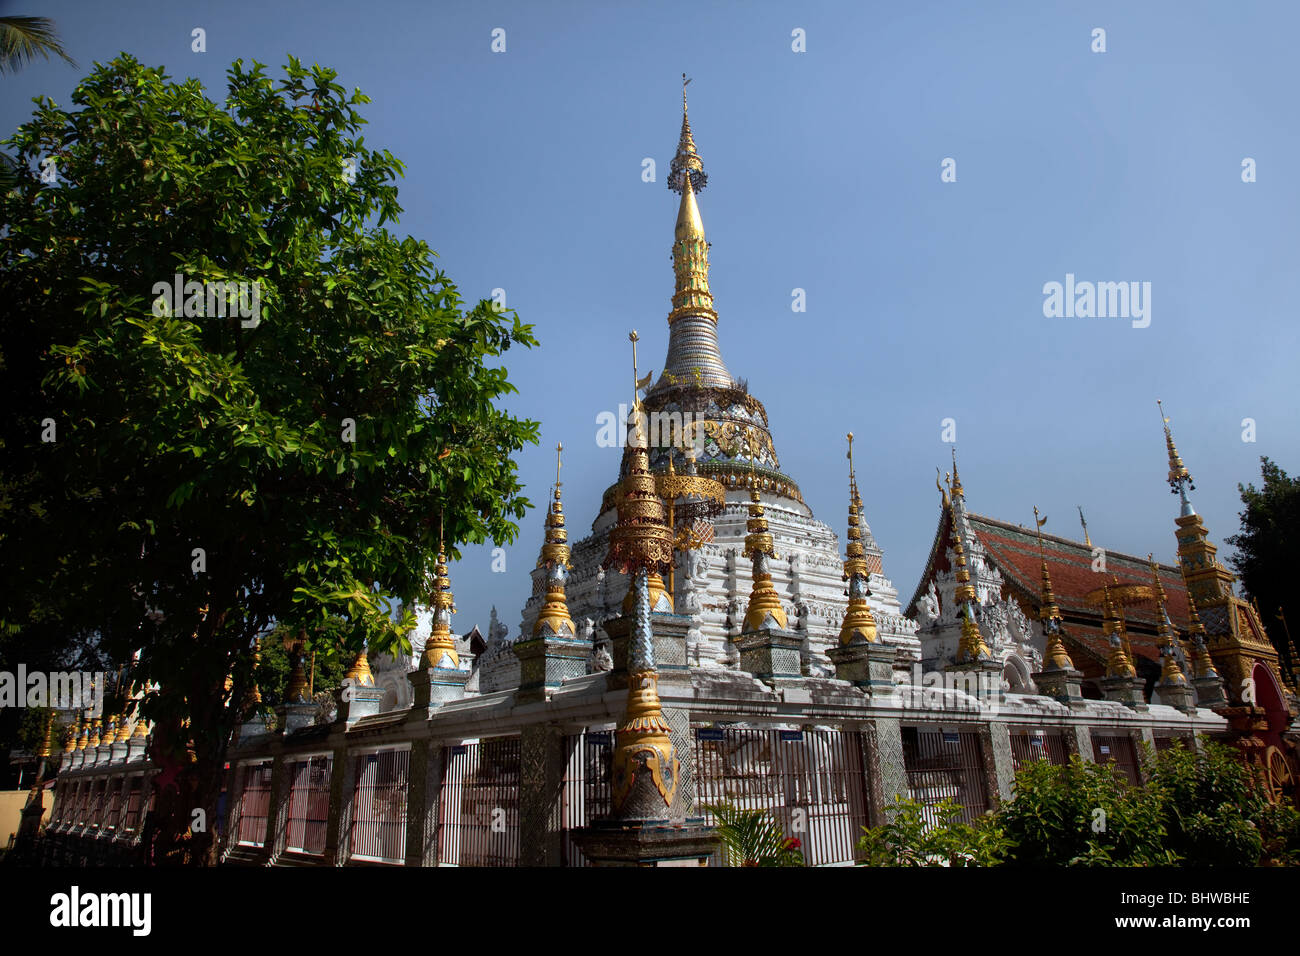 The Buddhist Temple Wat Saenfang, or Wat Saen Fang in Chiang Mai Thailand Stock Photo